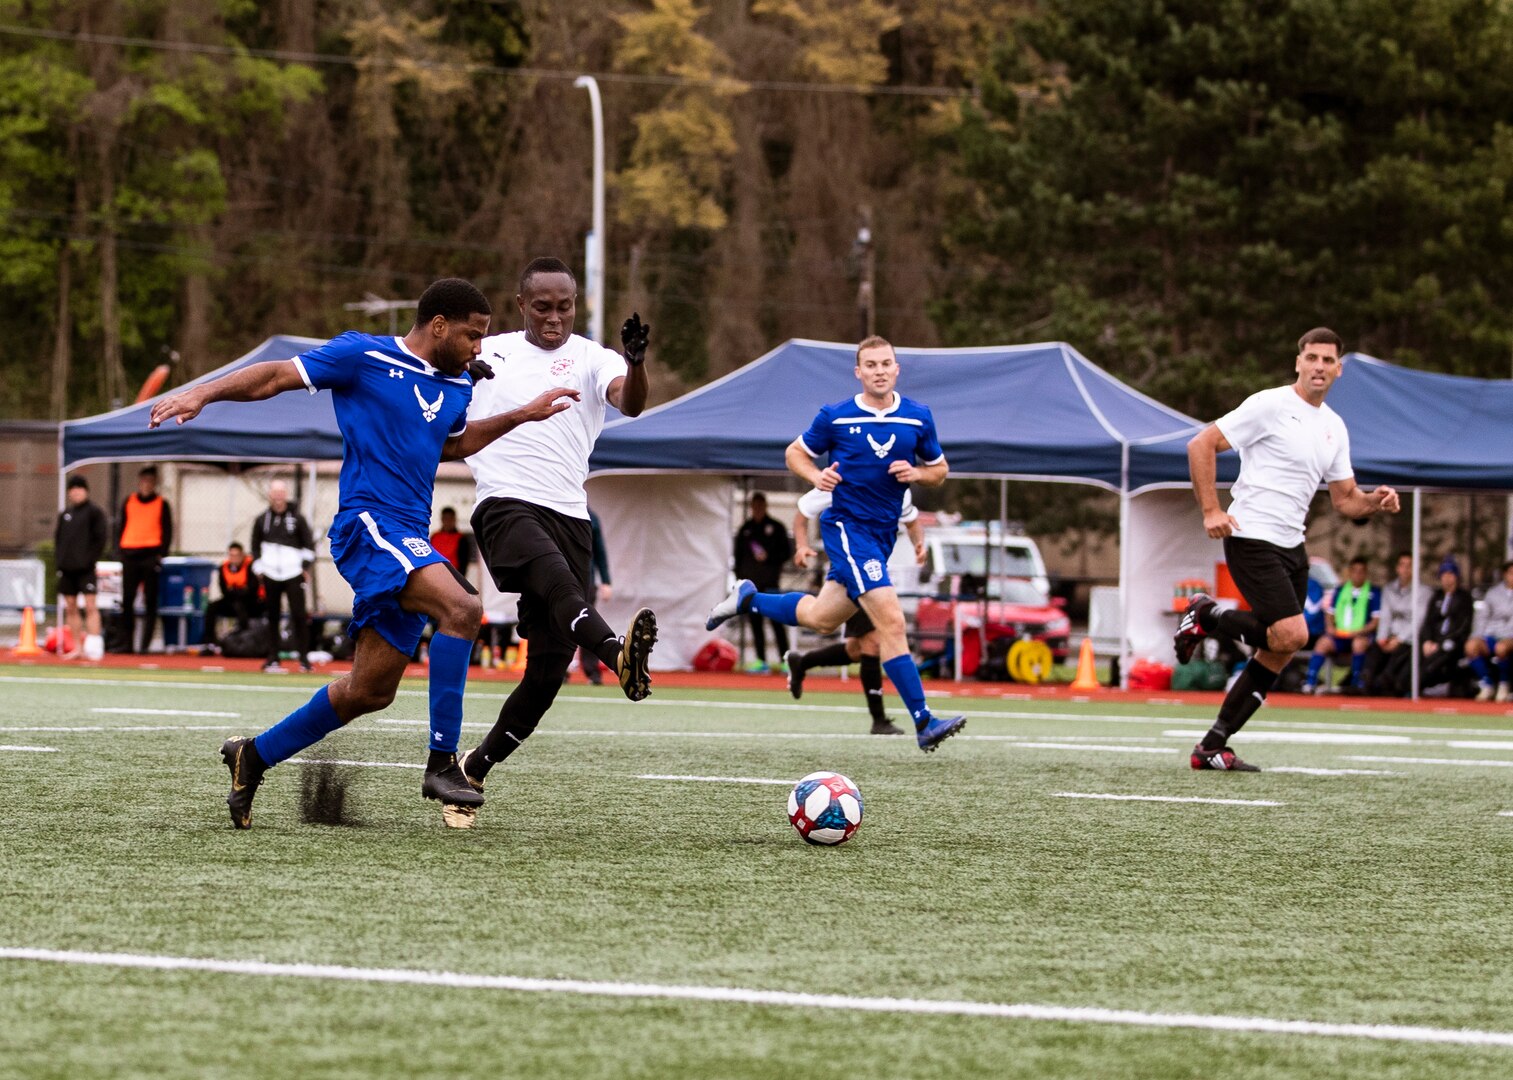 NAVAL STATION EVERETT, Wa. (April 16, 2019) - Players for the Air Force soccer compete for the ball against players from Marine Corp soccer team during a second round match of the Armed Forces Sports Men’s Soccer Championship hosted at Naval Station Everett. (U.S. Navy Photo by Mass Communication Specialist 2nd Class Ian Carver/RELEASED).